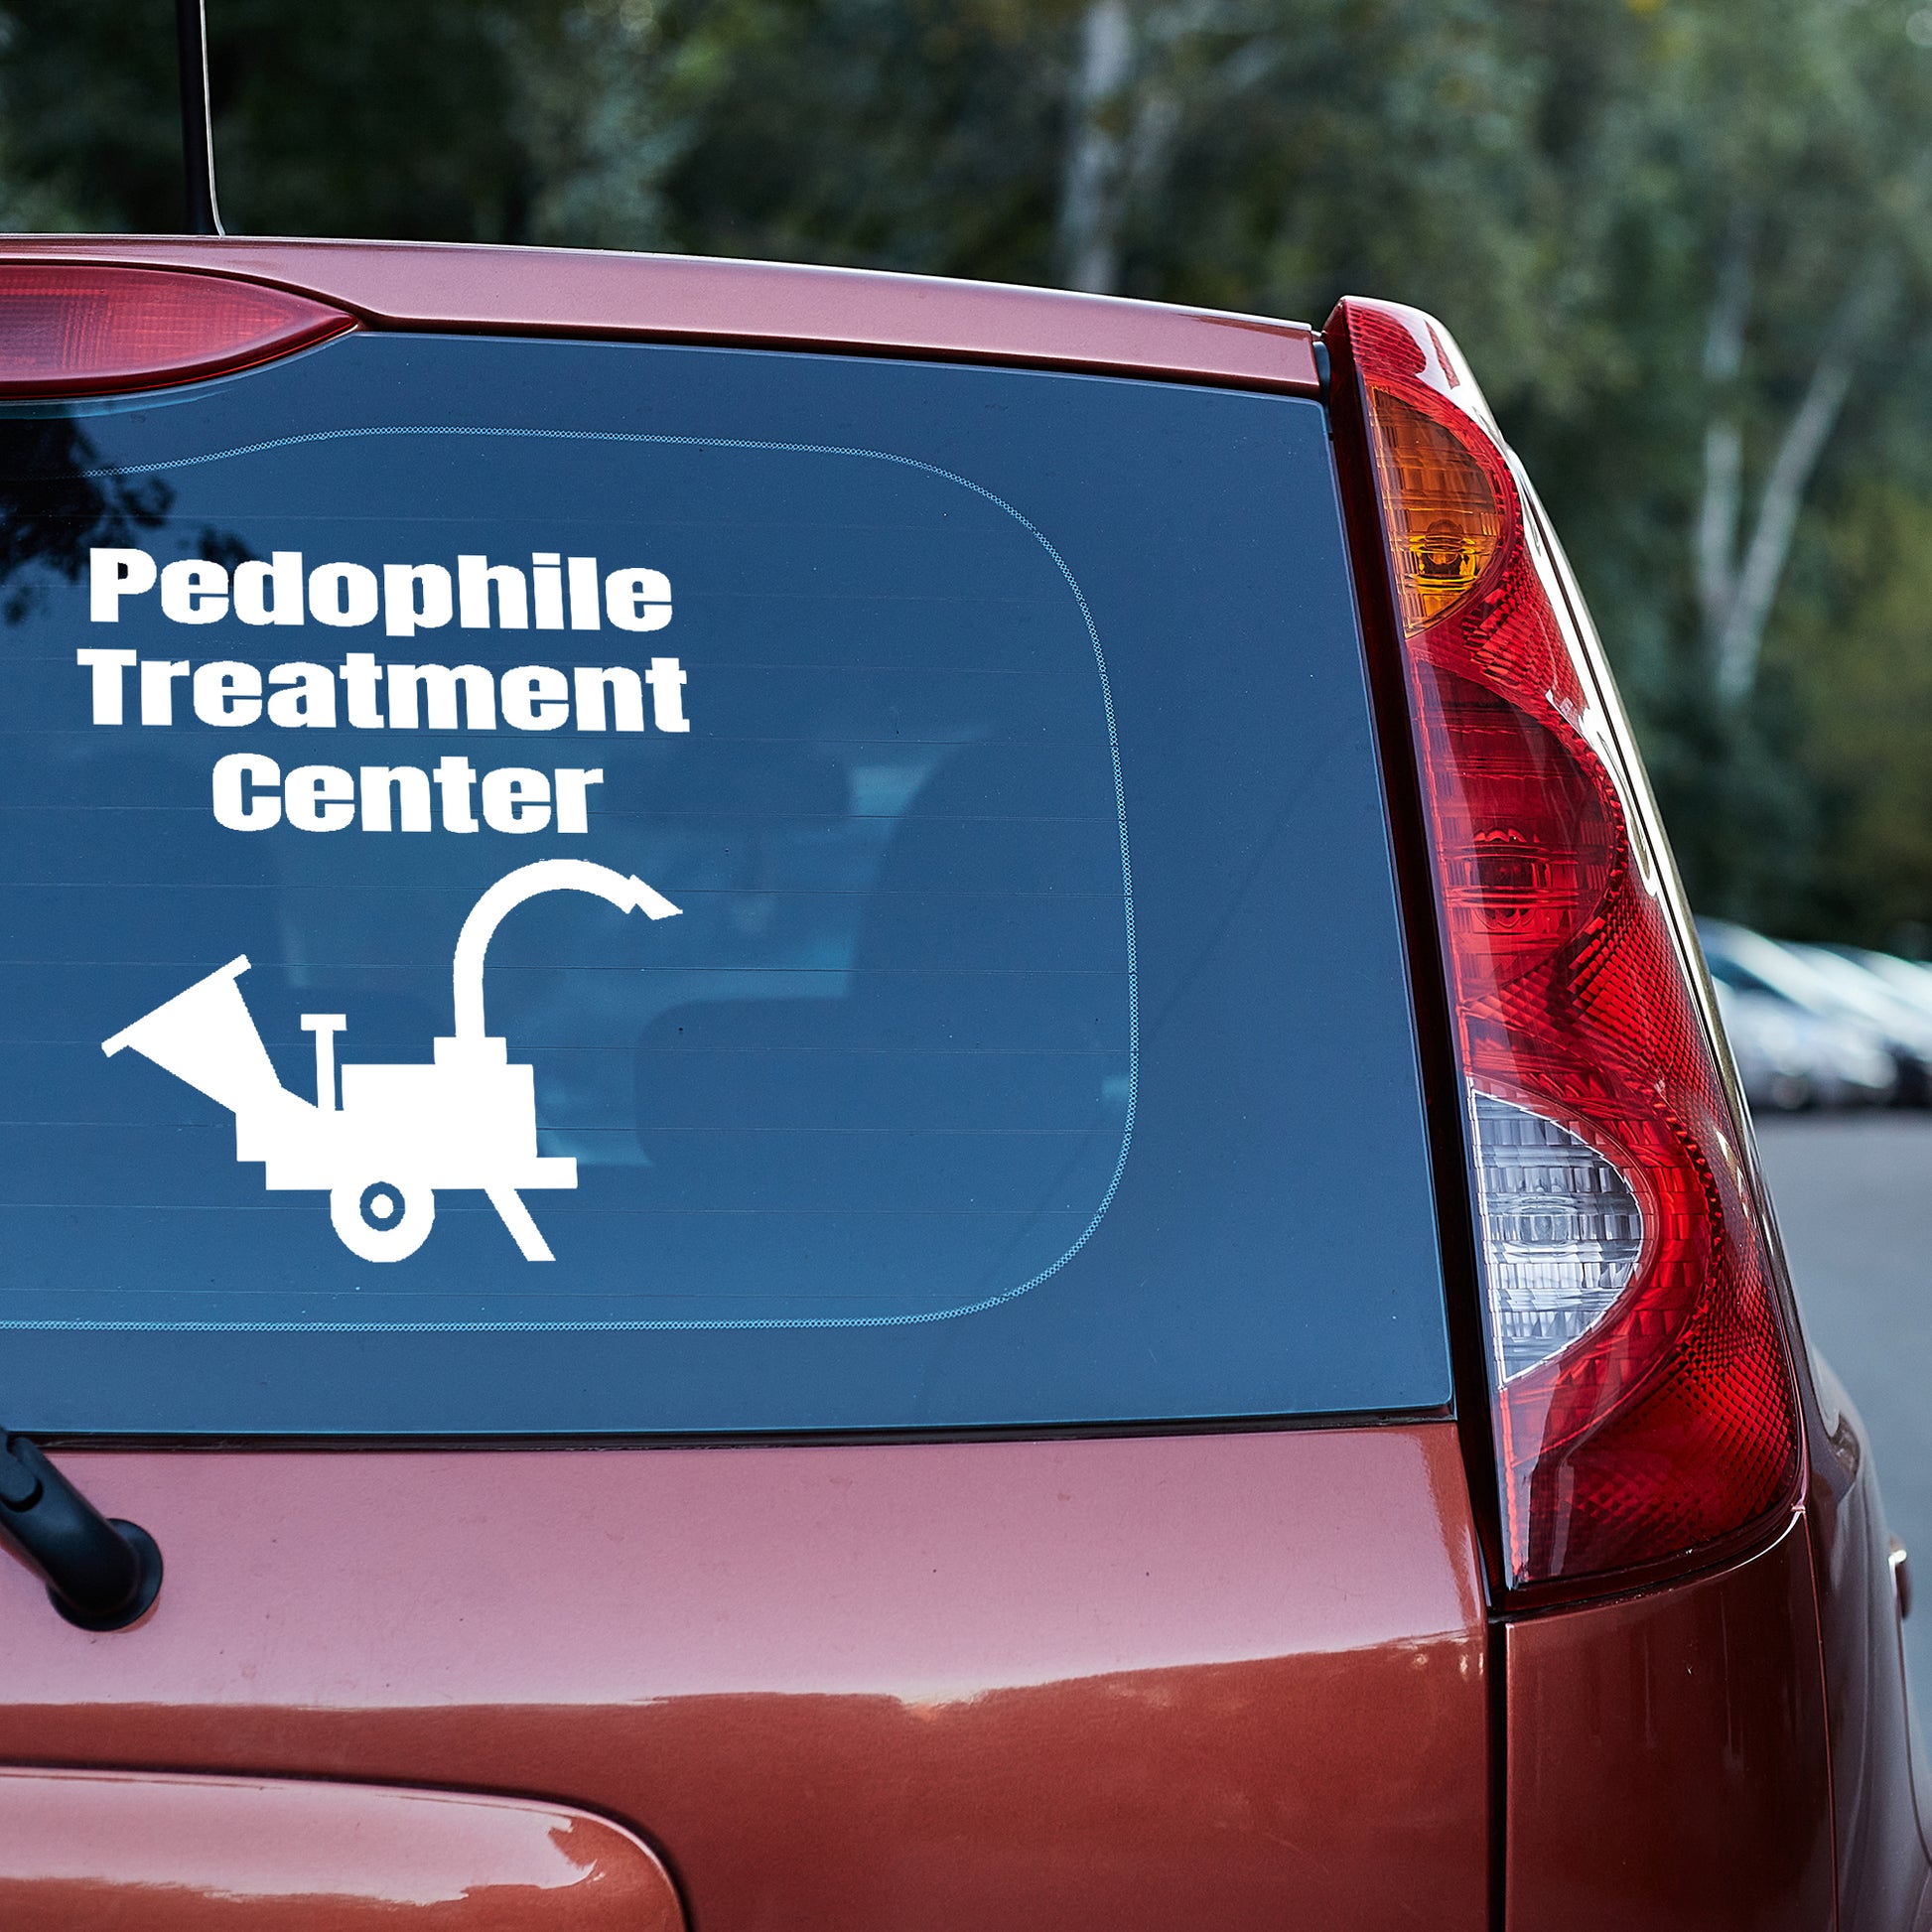 Pedophile Treatment Center vinyl decal car decal decal for cars decal for trucks Decals for cars Decals for Trucks decals for tumblers decals for vehicles door decal funny decals p diddy Window decals